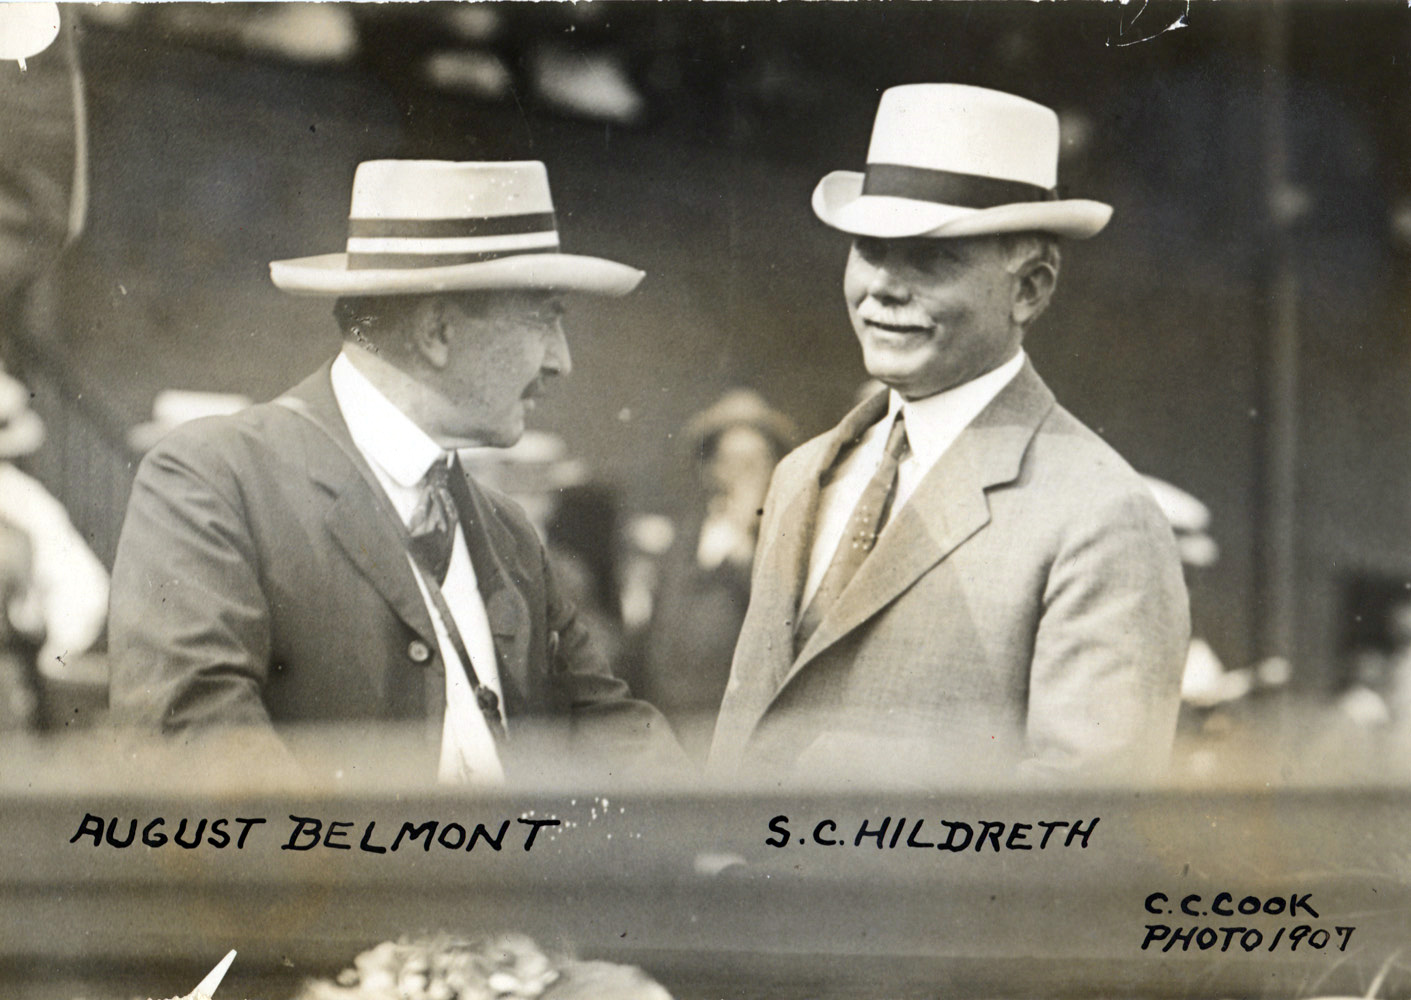 August Belmont and trainer Sam Hildreth in 1907 (C. C. Cook/Museum Collection)